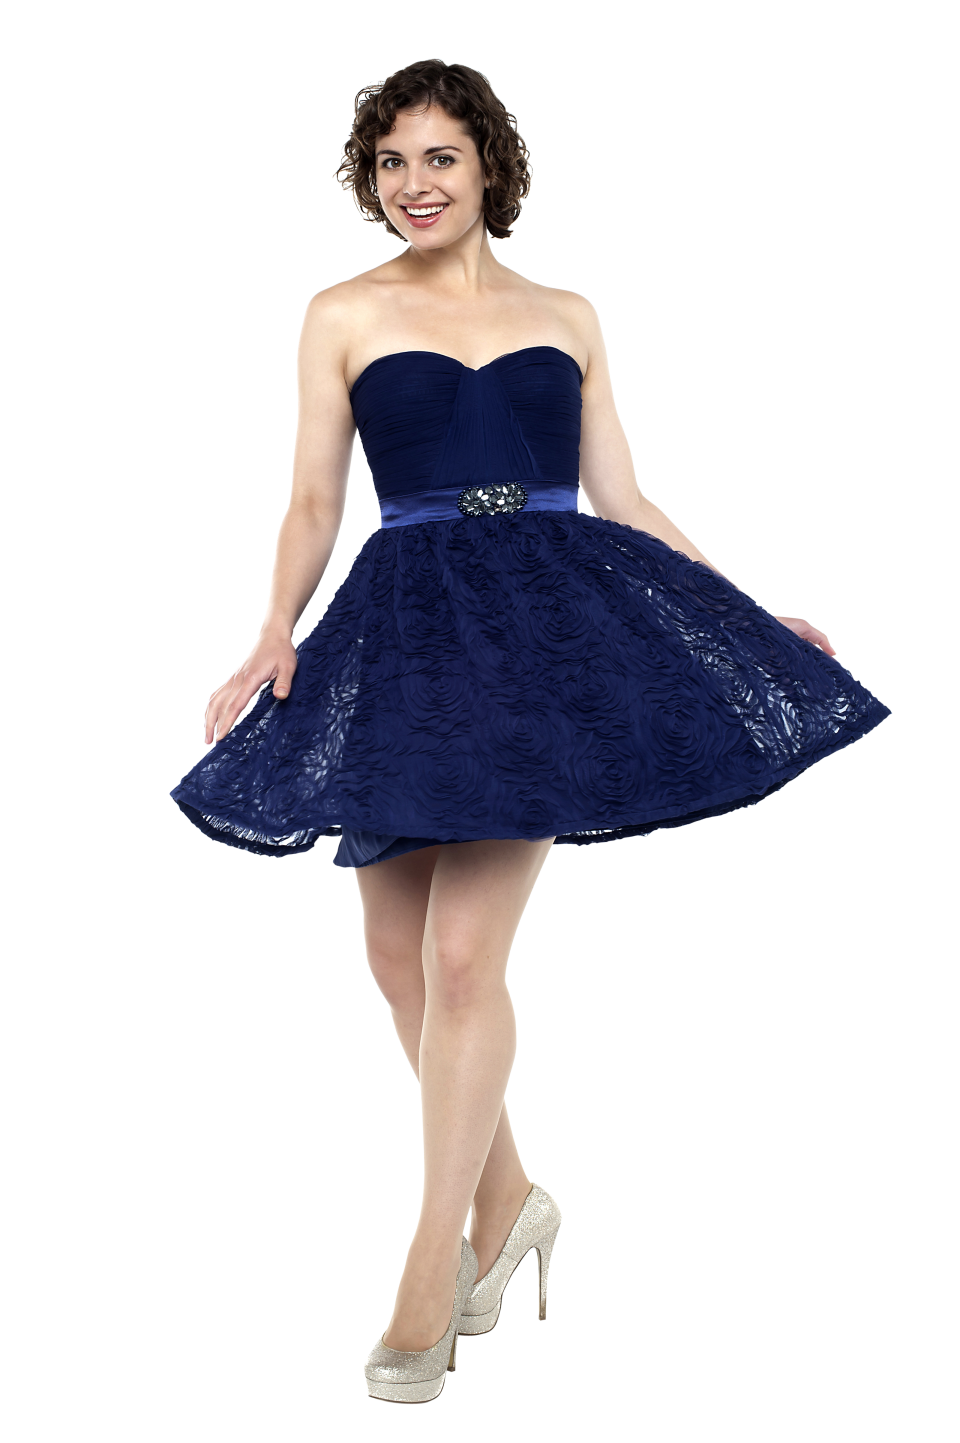 Fashion Girl PNG Image - PurePNG | Free transparent CC0 PNG Image Library